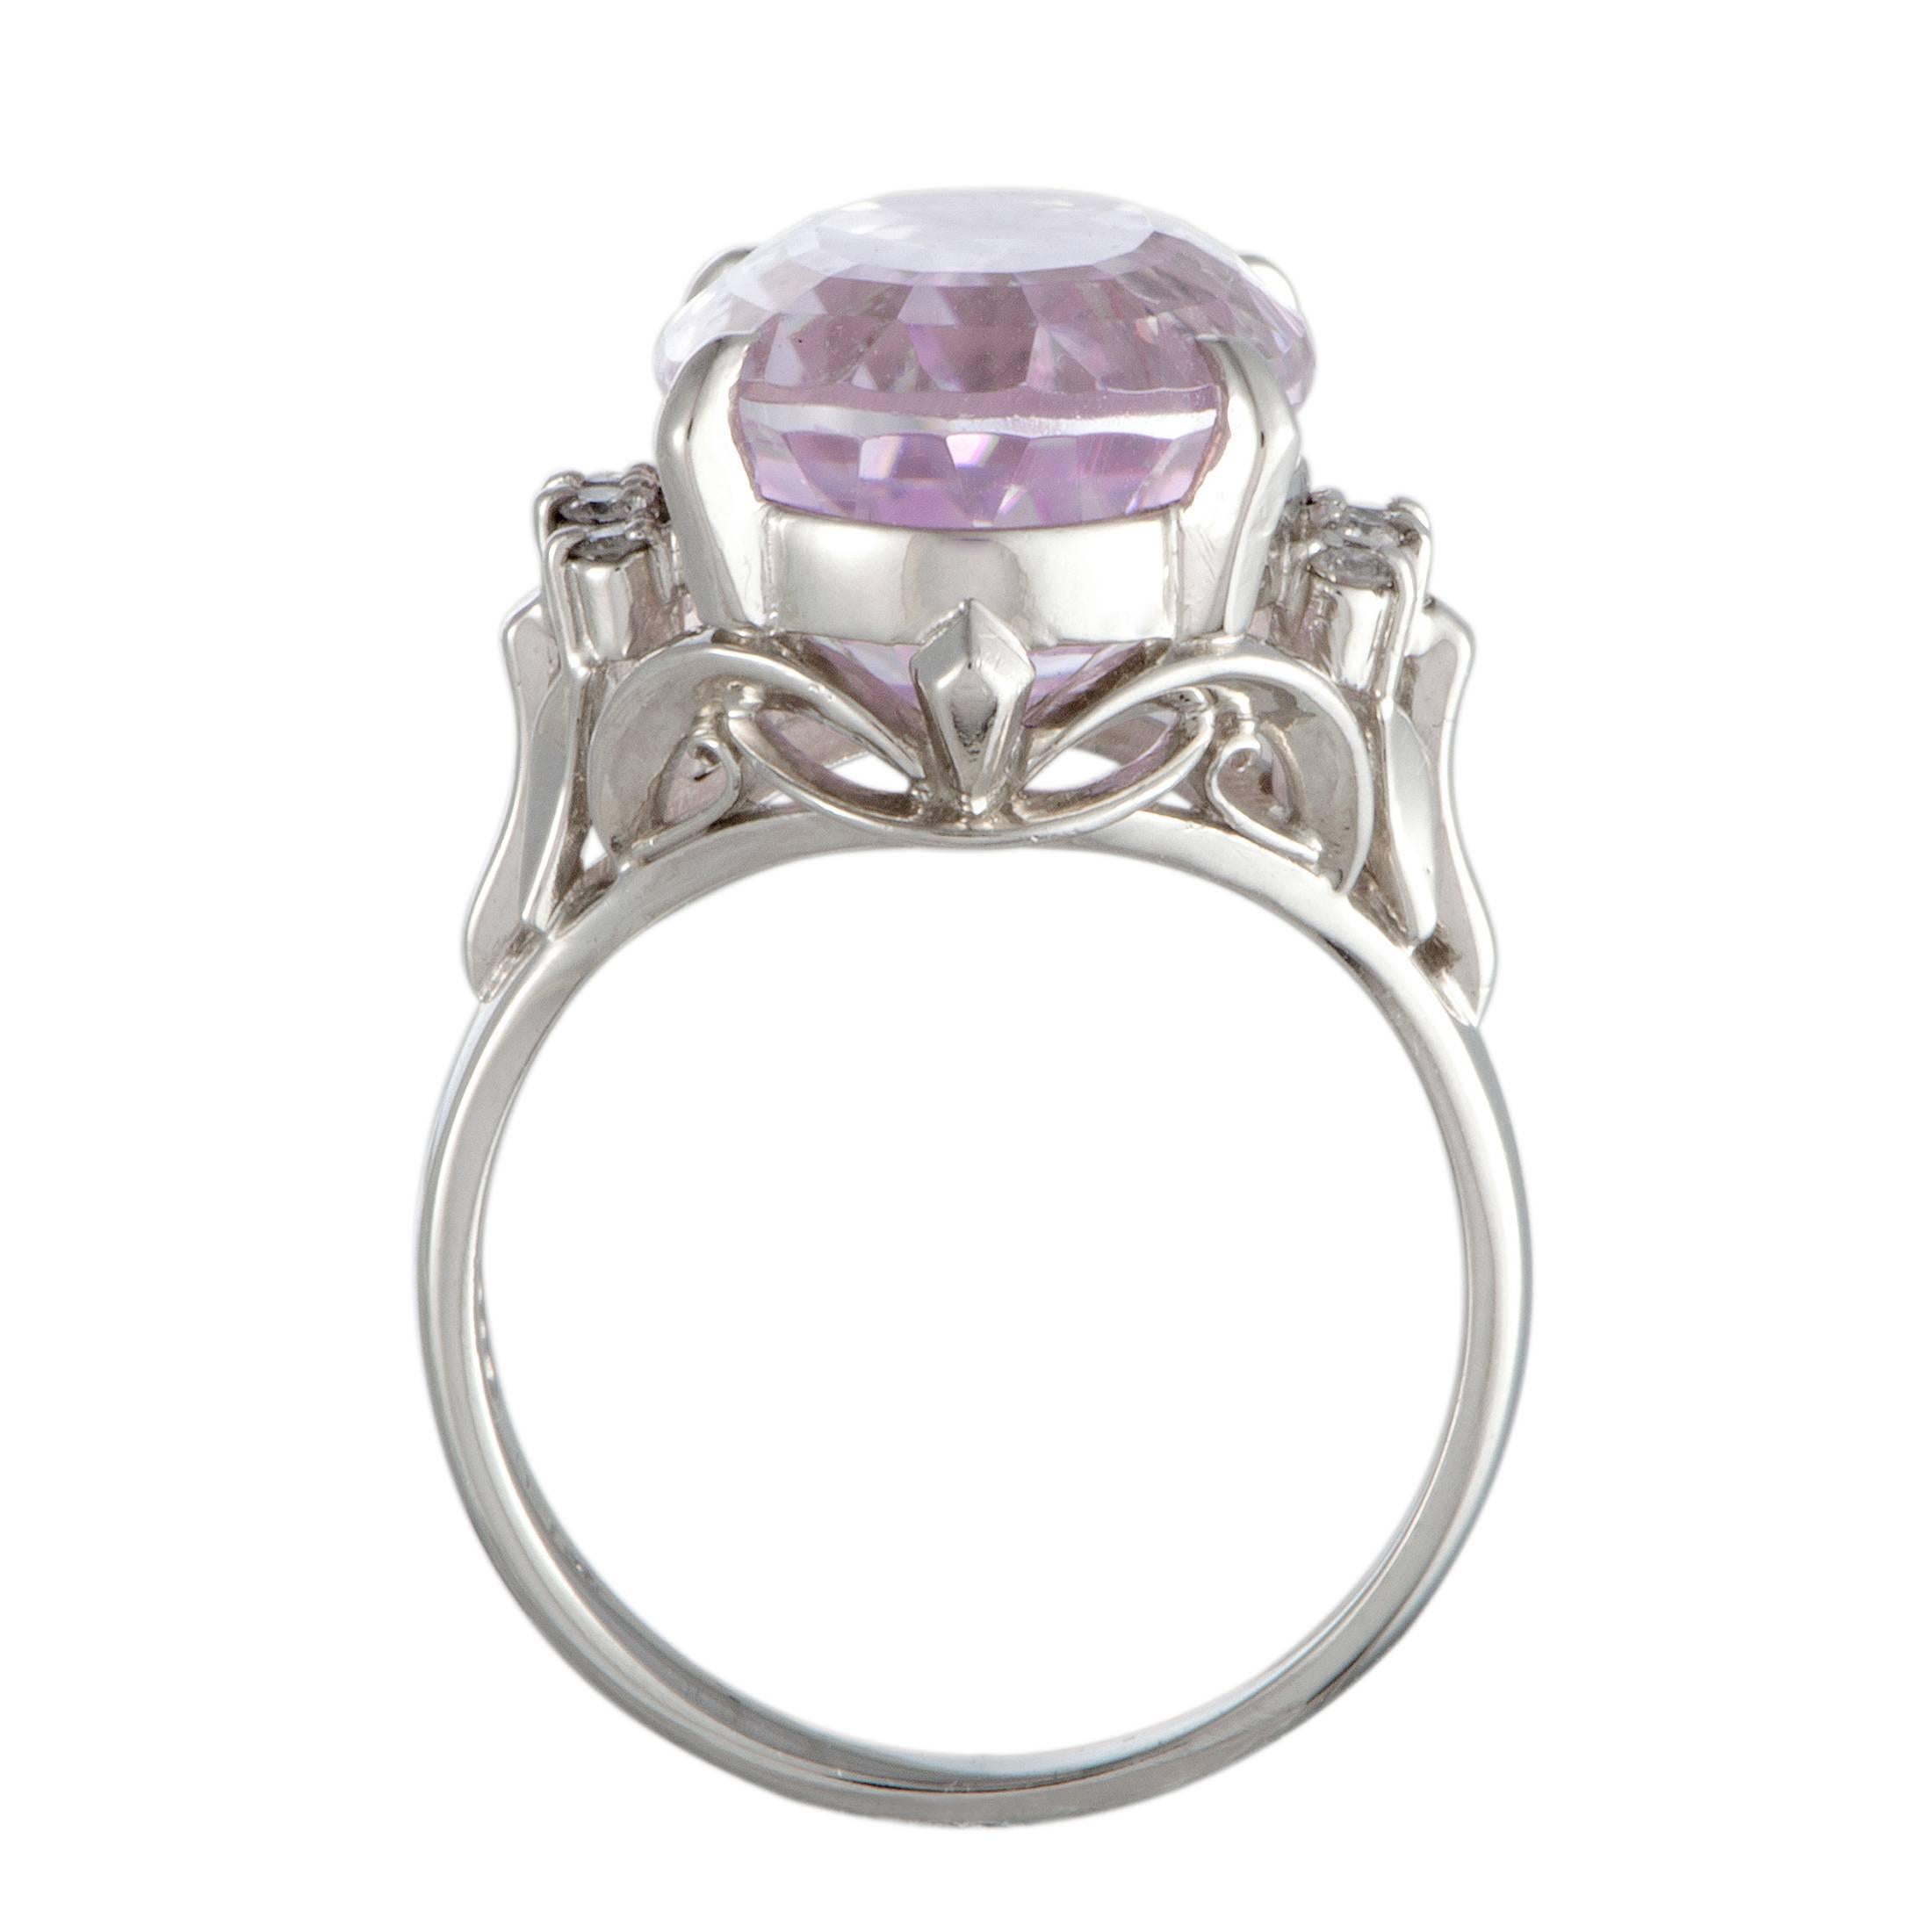 The sublime appeal of kunzite is splendidly complemented in this gorgeous ring by the elegant sheen of platinum and the scintillating brilliance of diamonds. The kunzite weighs 12.97 carats, while the diamonds total 0.07 carats.
Ring Top Dimensions: